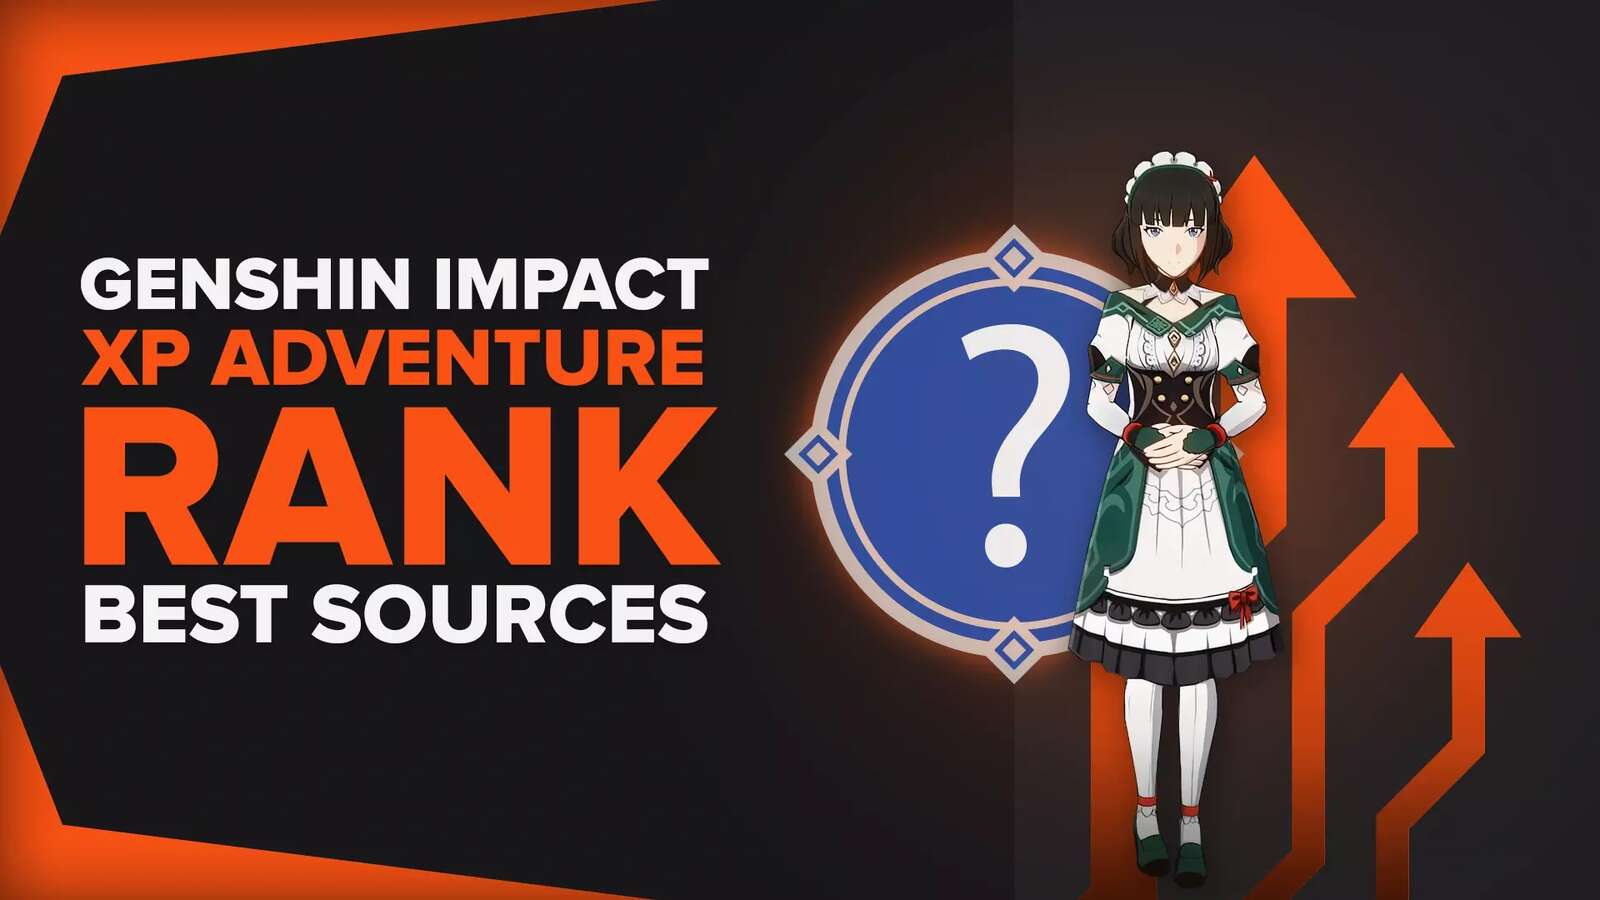 4 Best Sources for XP Adventure Rank in Genshin Impact